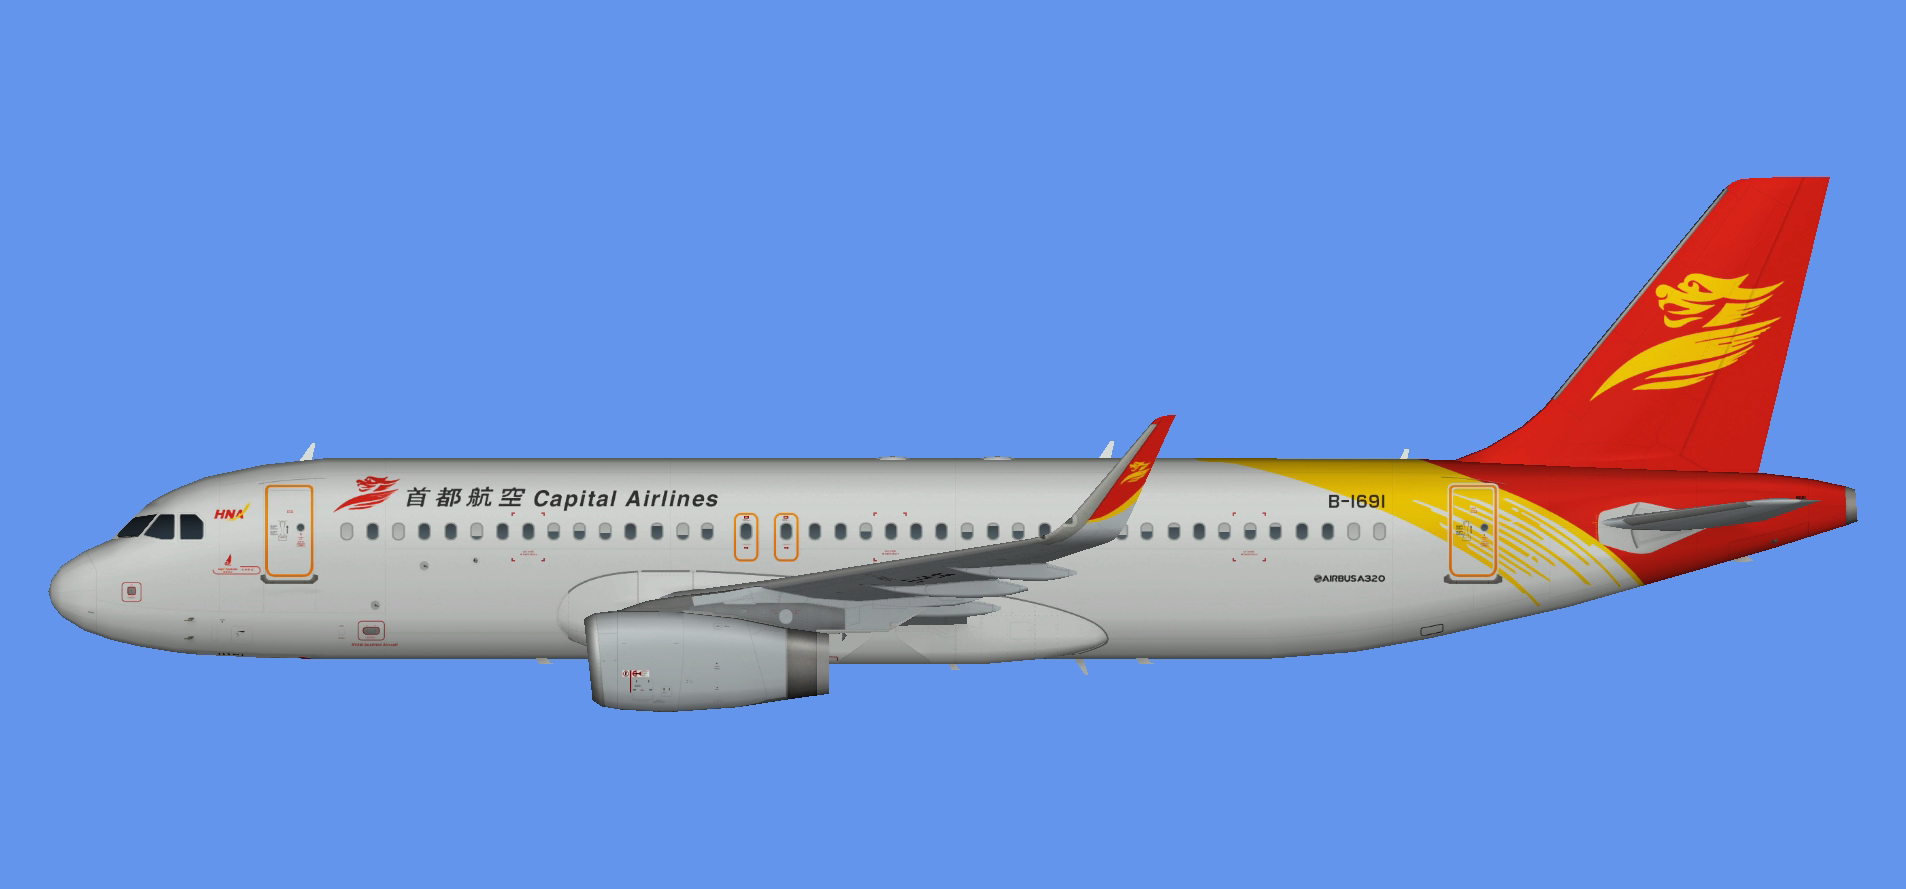 Capital Airlines Airbus A320 SL IAE